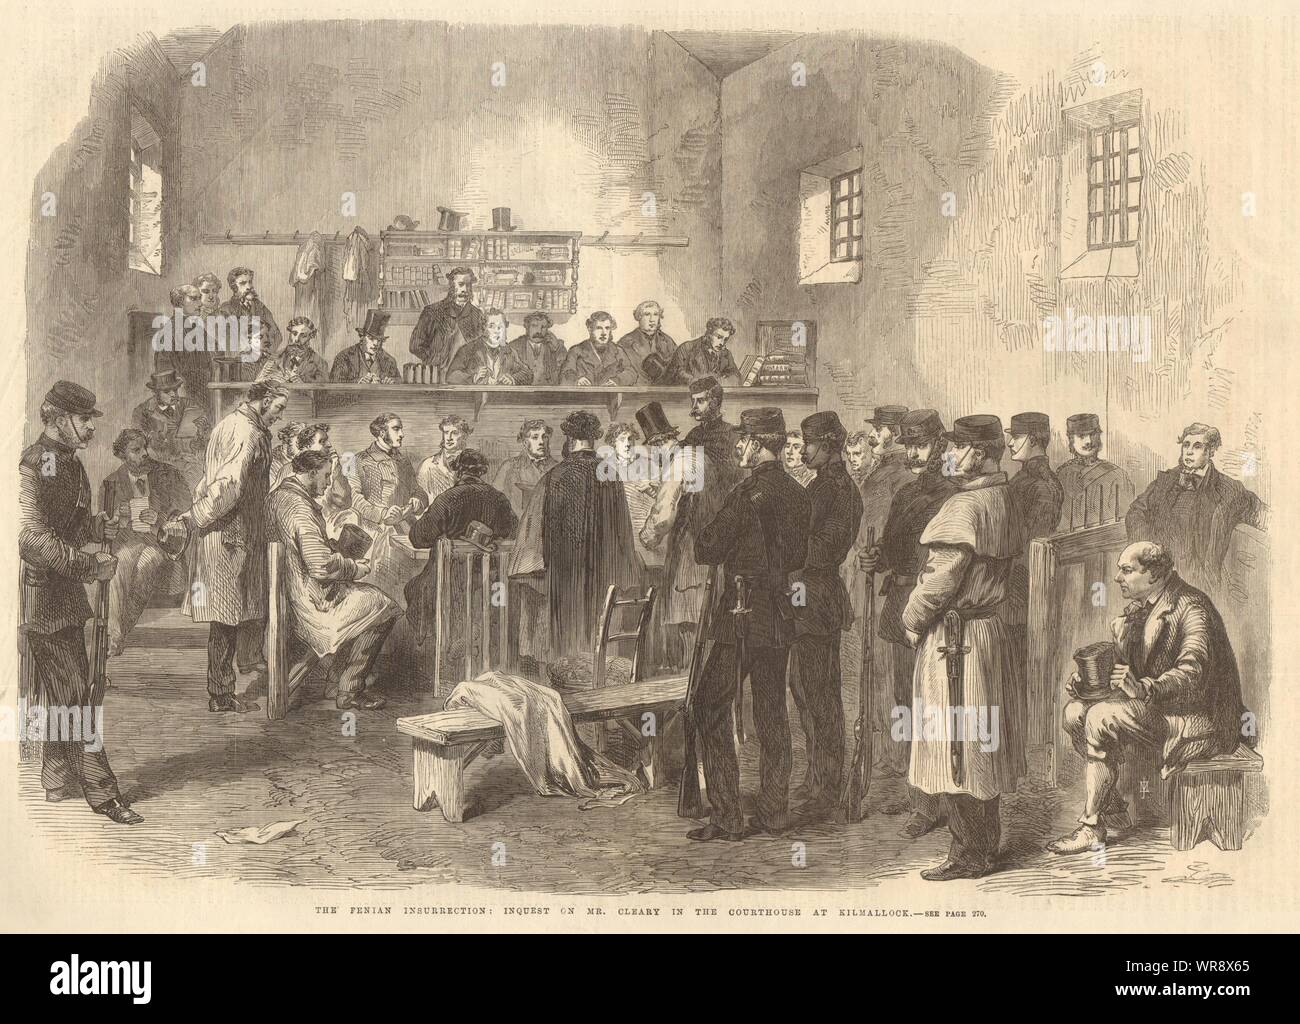 The Fenian insurrection: inquest on Mr. Cleary at Kilmallock courthouse 1867 Stock Photo